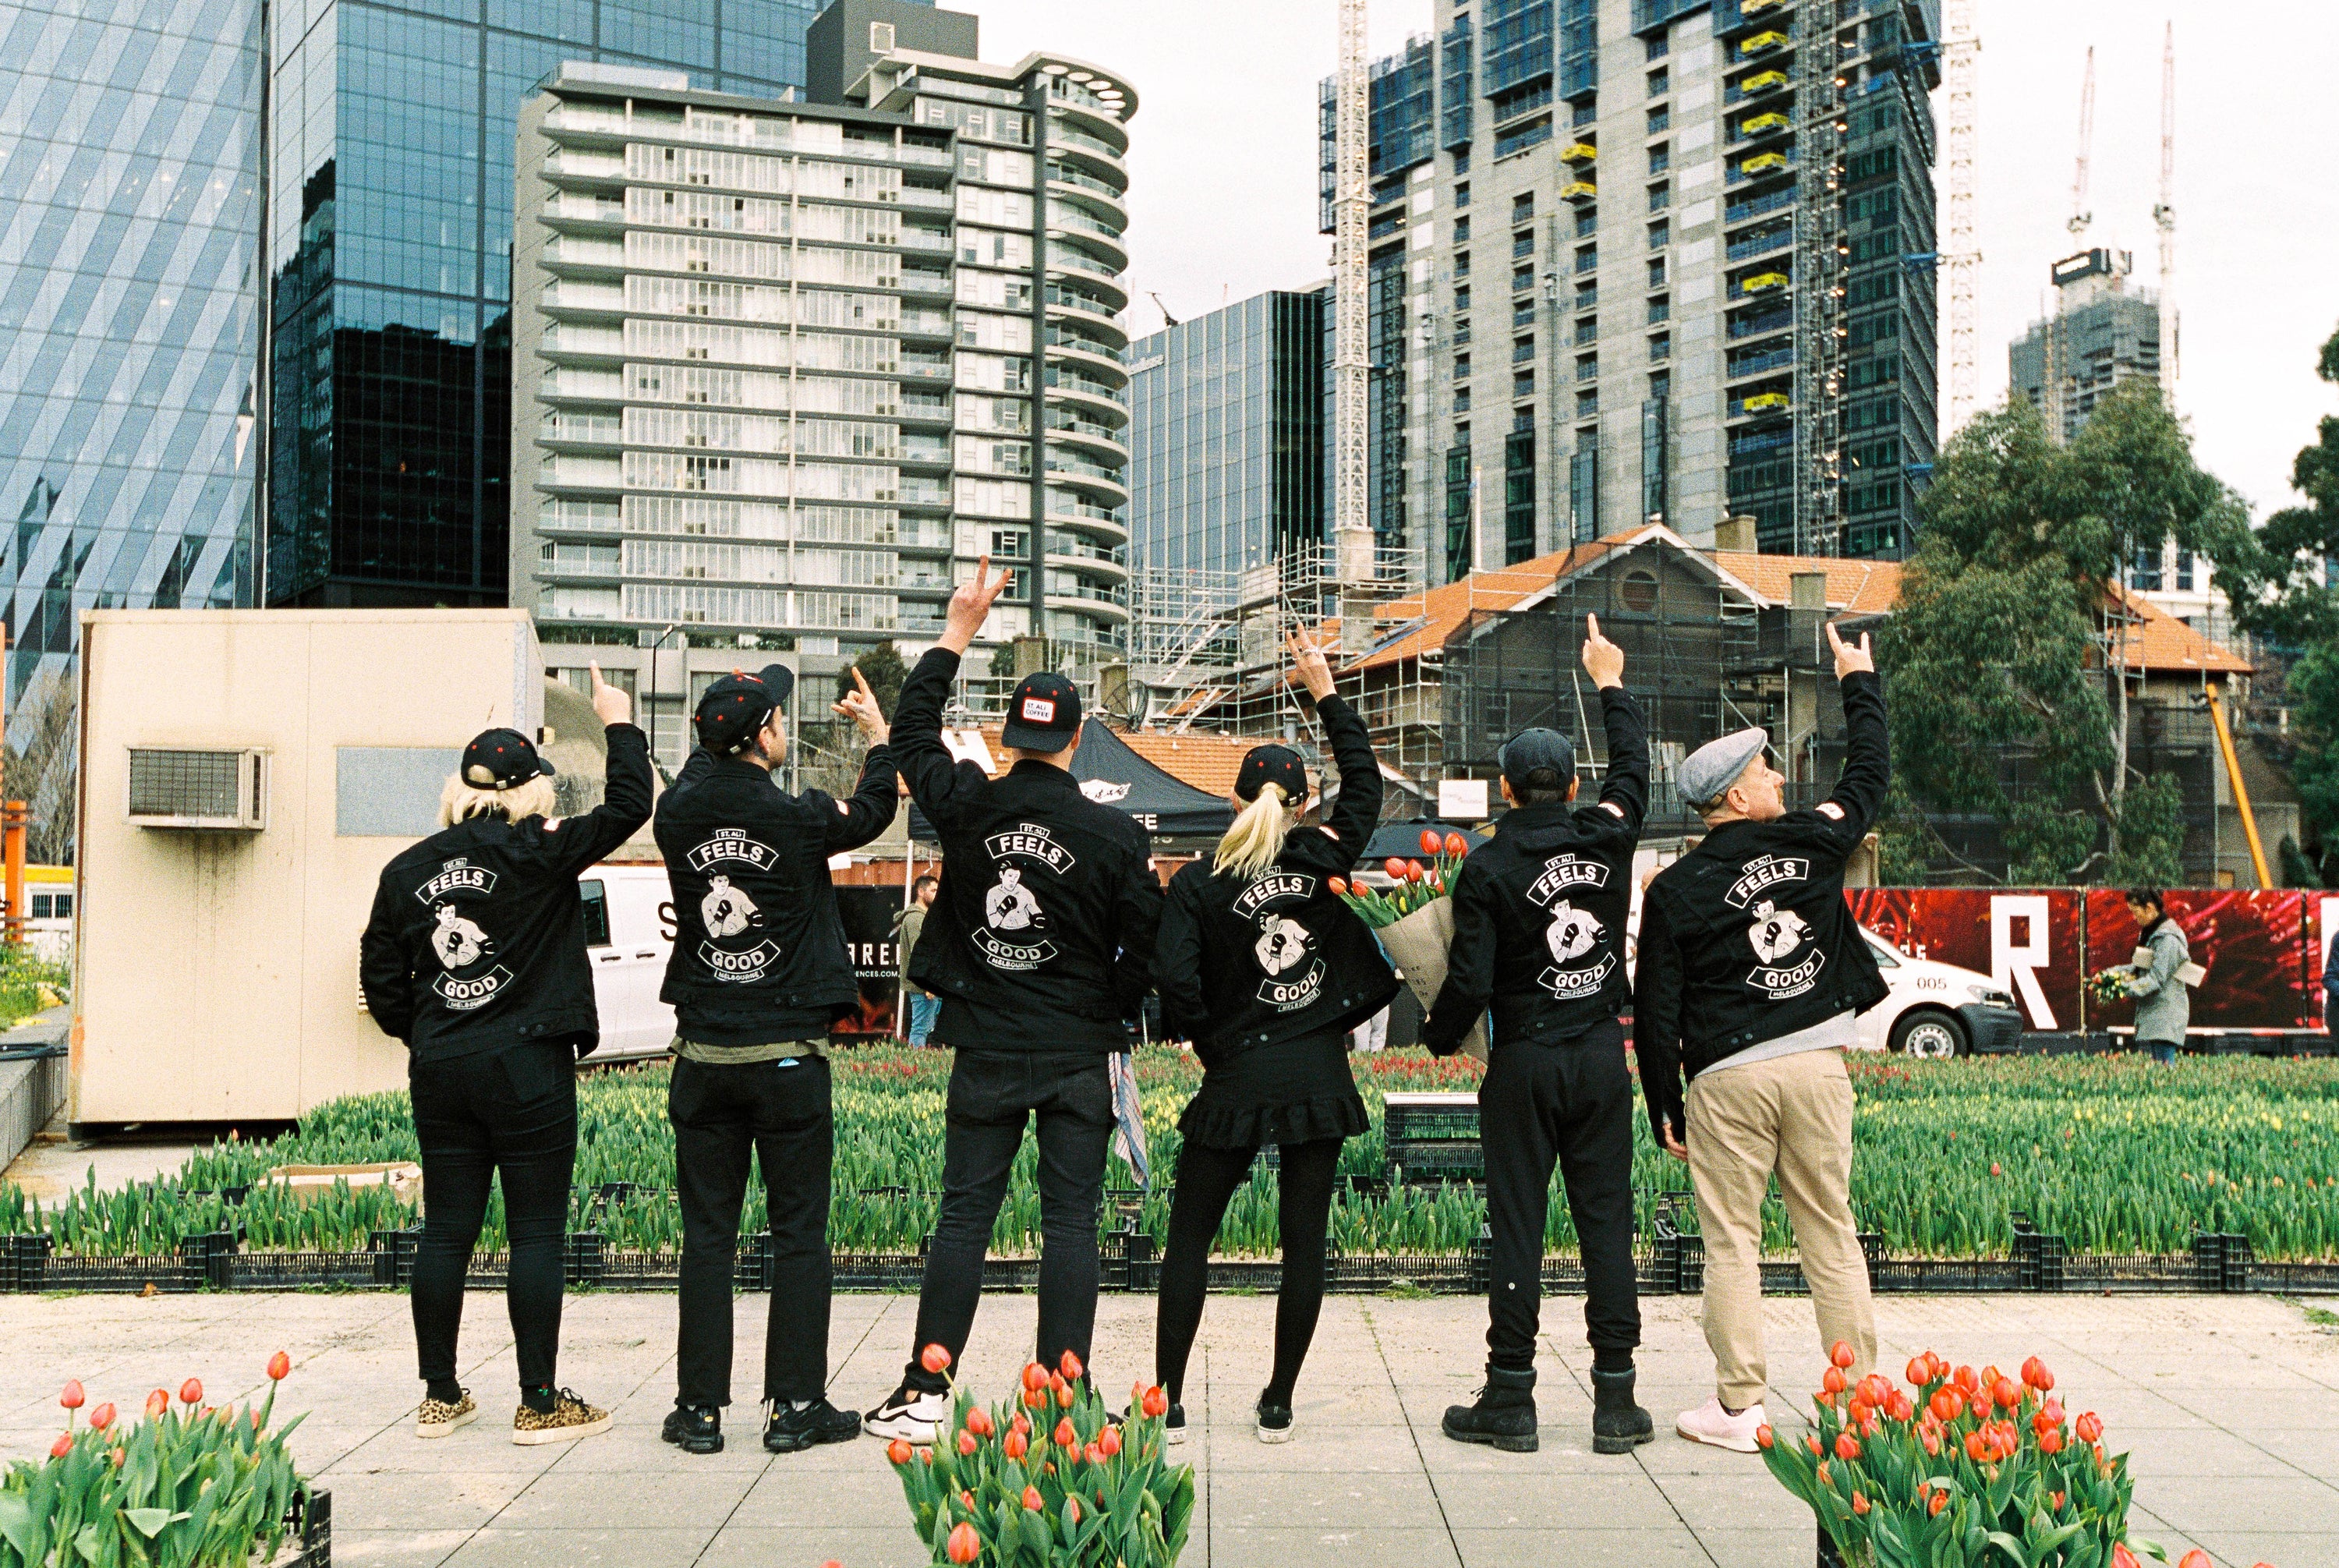 People facing the city wearing ST. ALi jackets